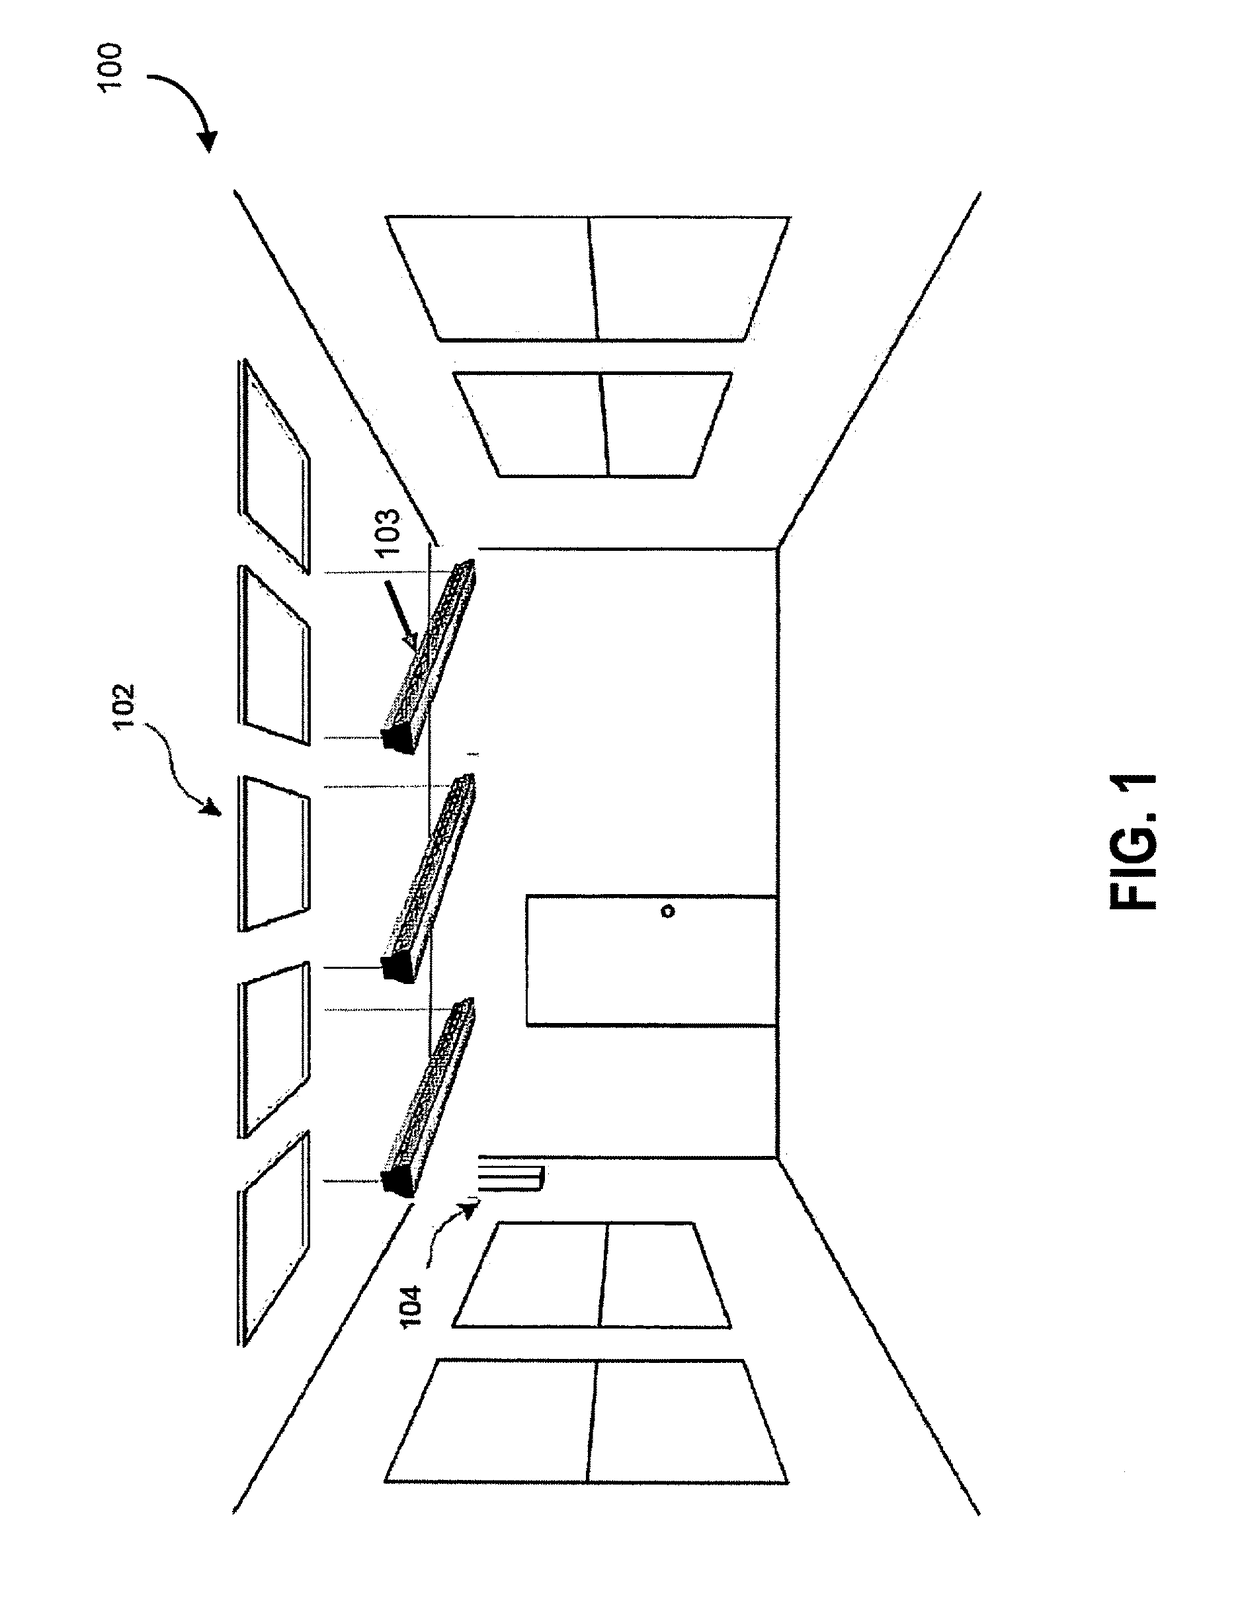 Systems and methods for controlling environmental illumination